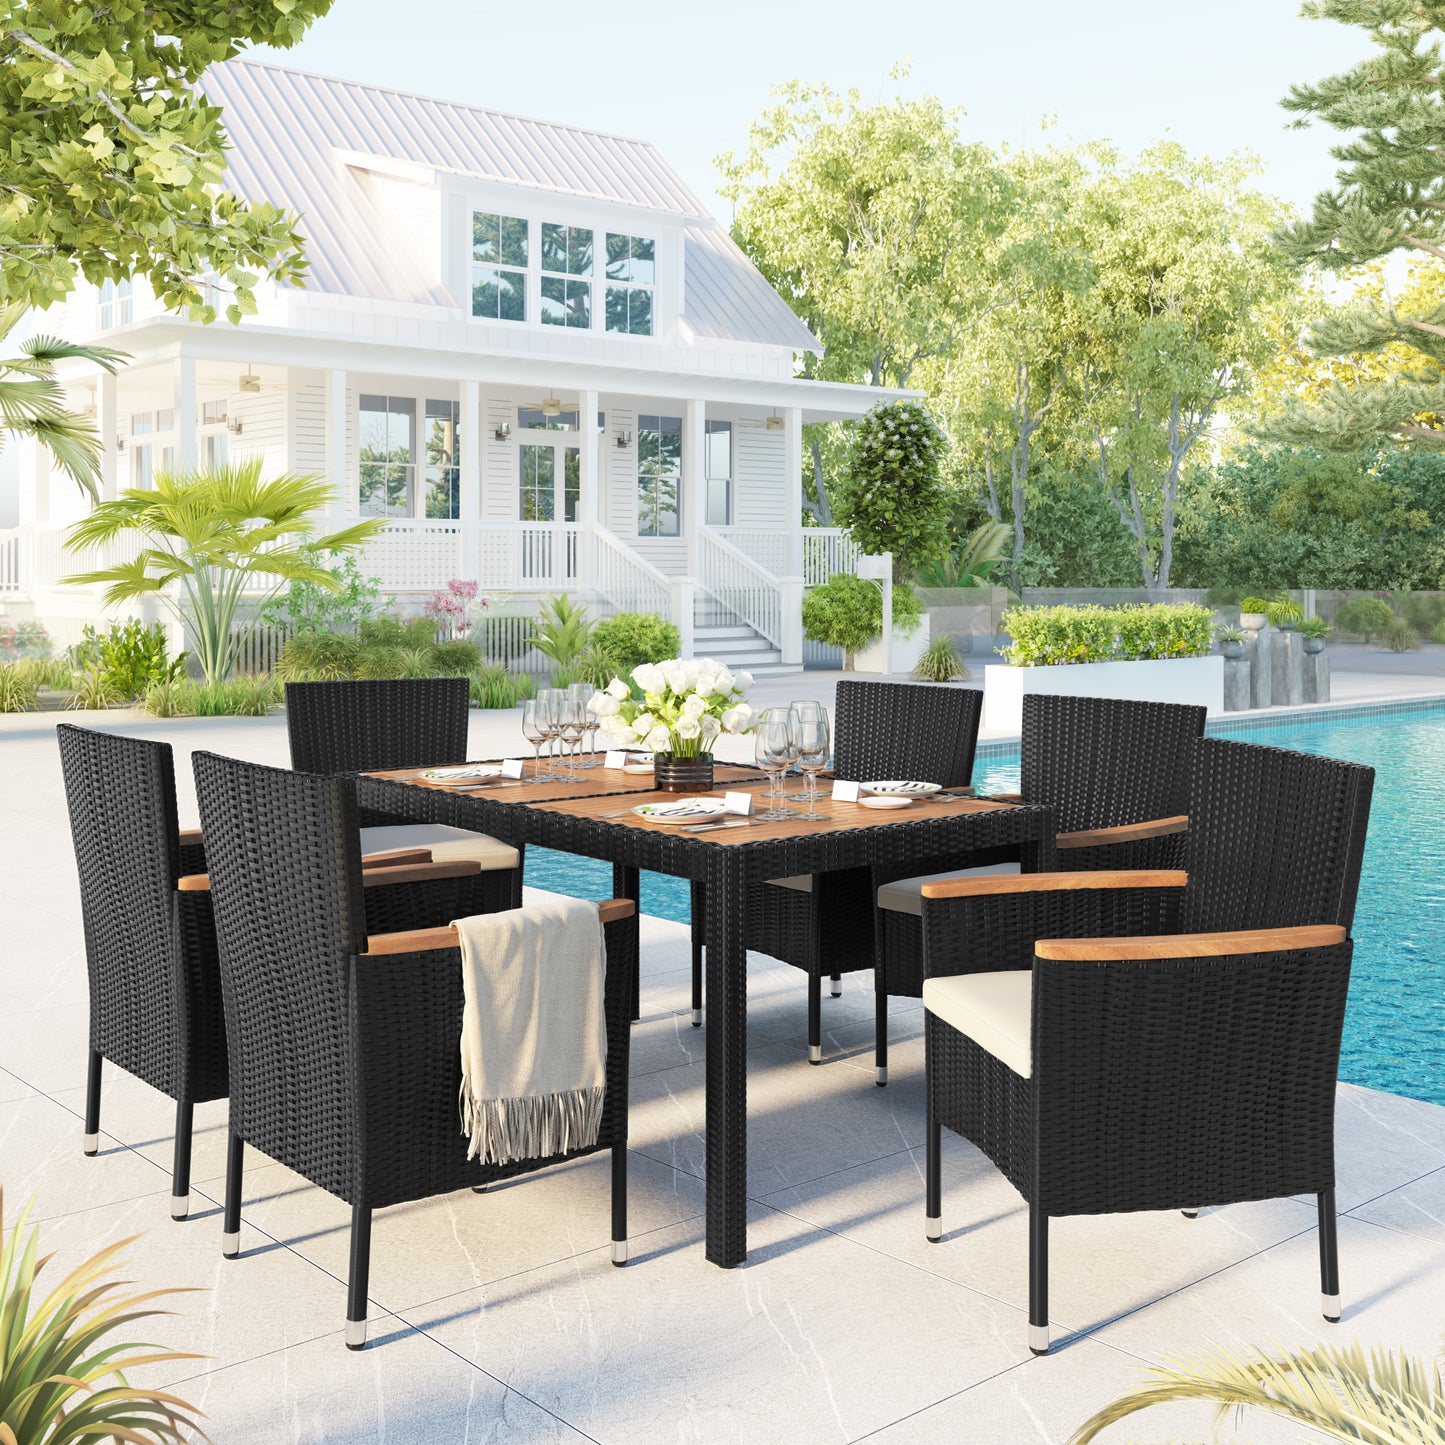 SYNGAR 7 Piece Outdoor Dining Set, All Weather PE Wicker Dining Table Set, Patio Rattan Furniture Set with Rectangular Acacia Wood Table and 6 Cushioned Chairs, for Backyard, Poolside, Balcony, D7335